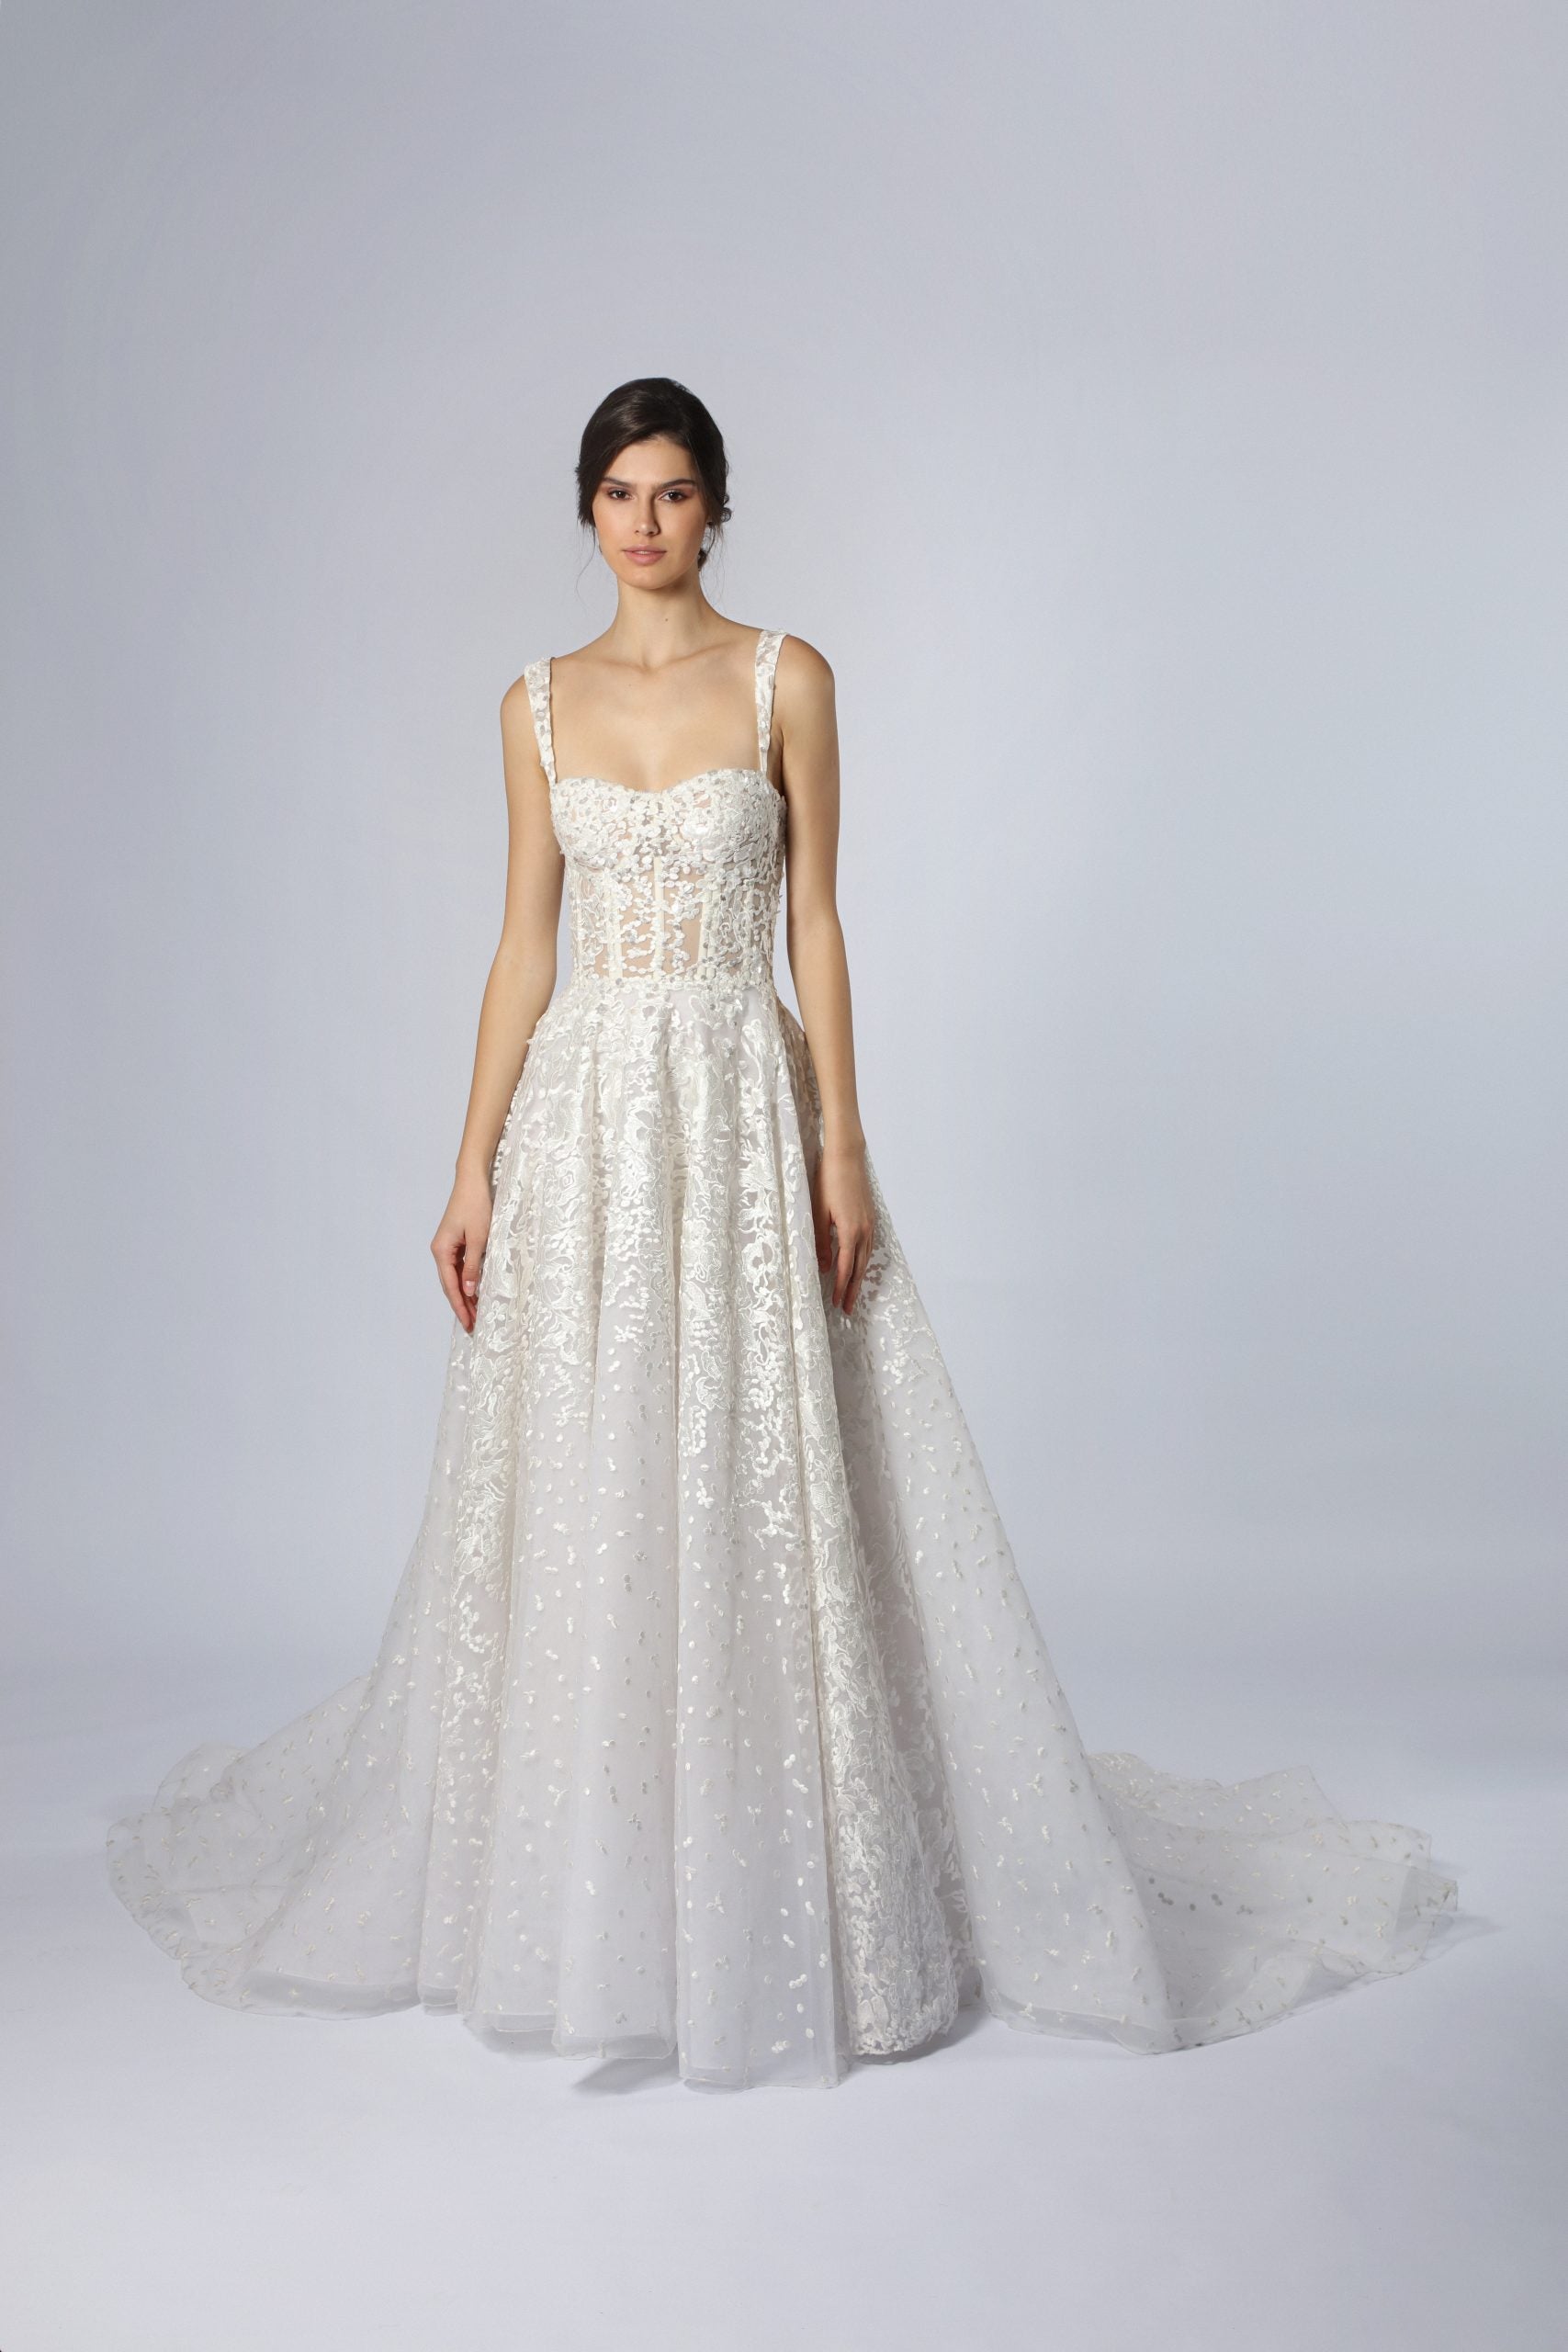 Sweetheart Embroidered A-Line Gown by Tony Ward - Image 1